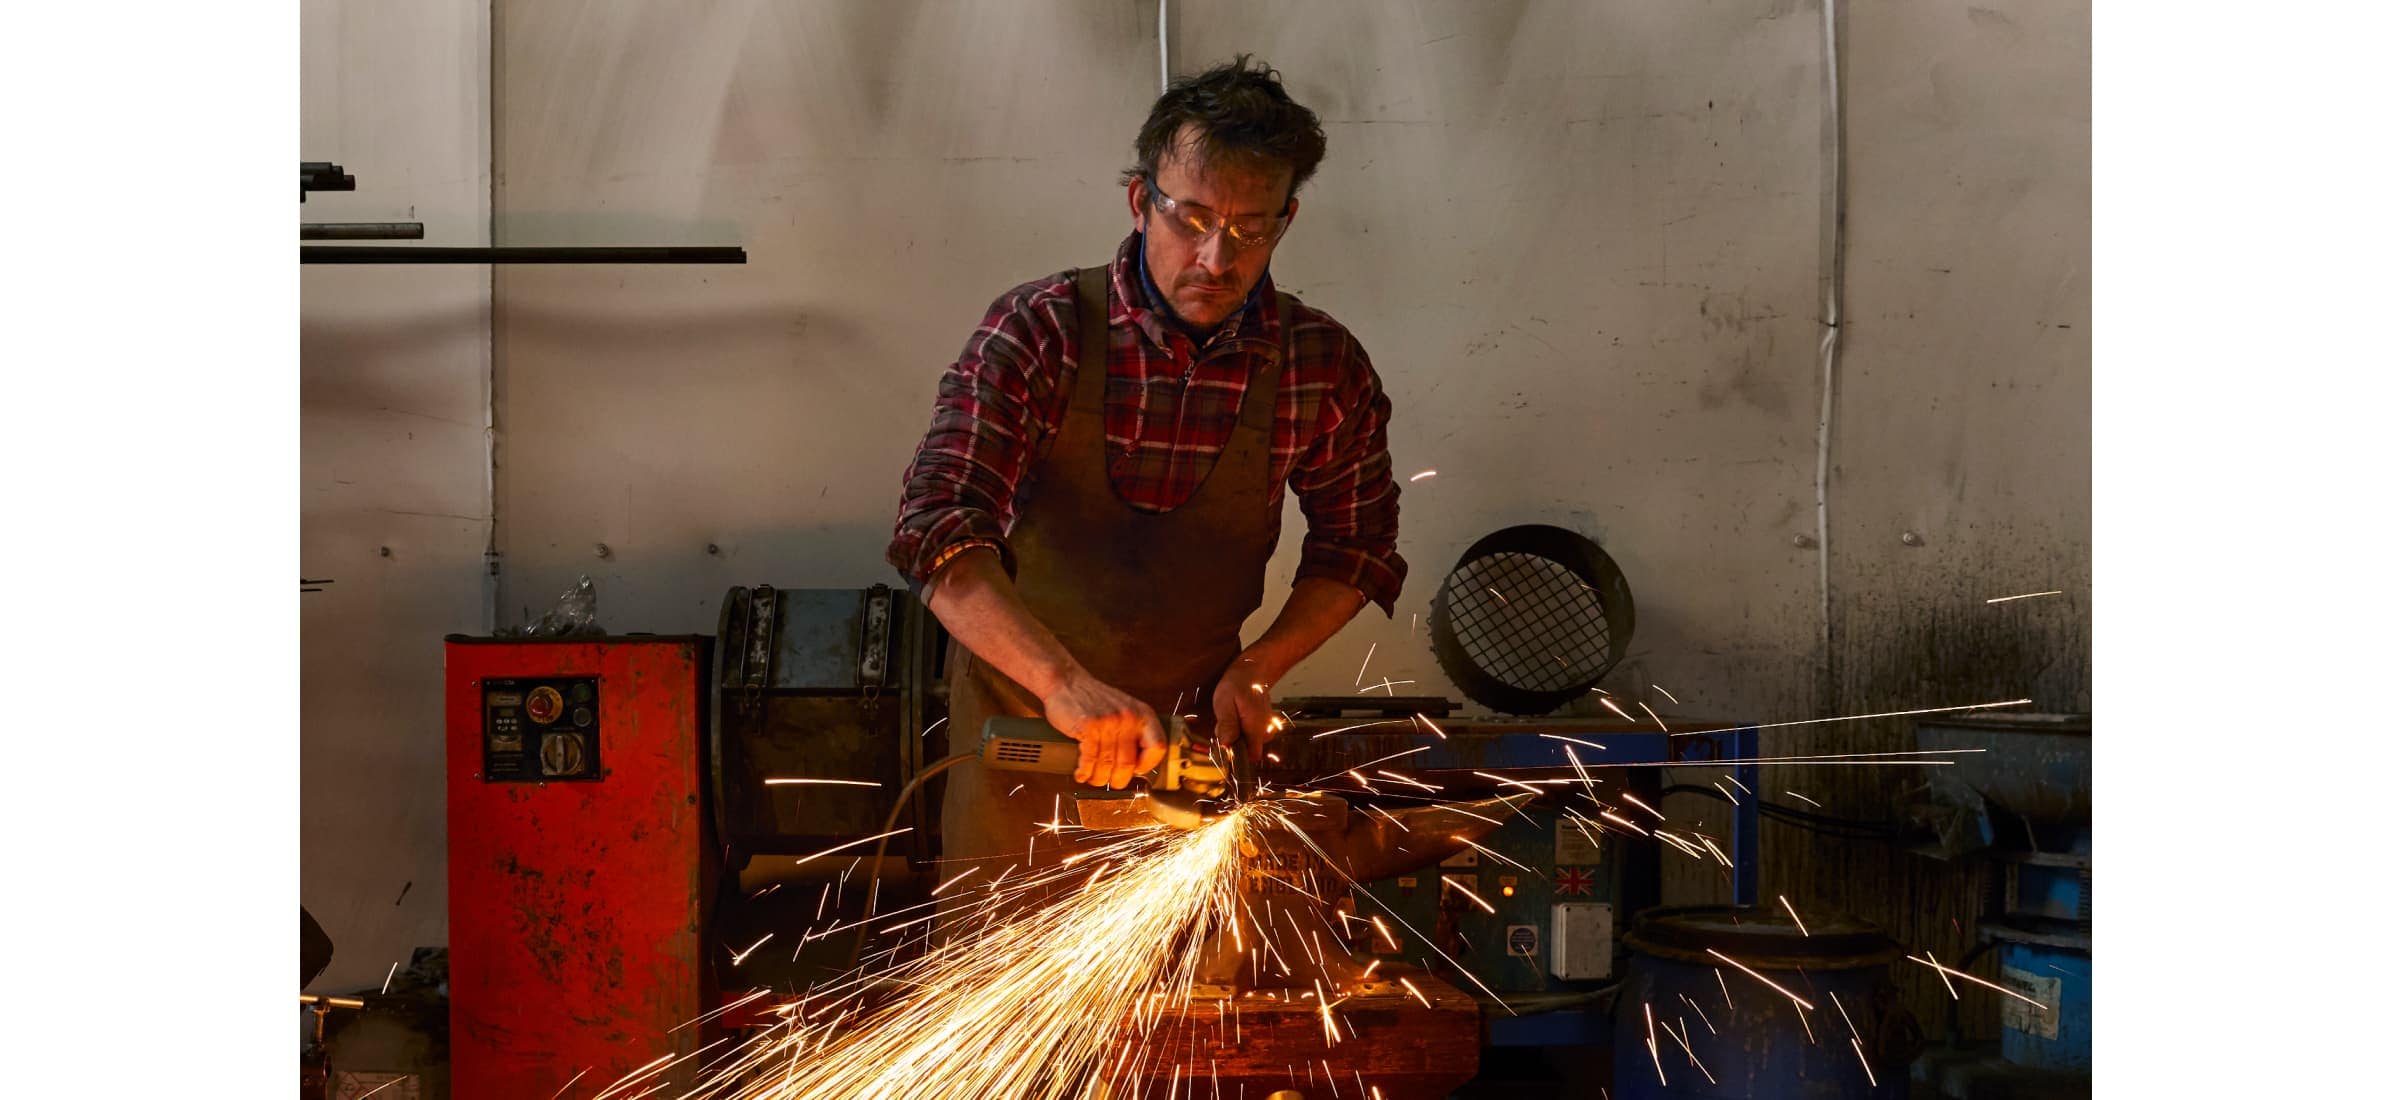 Richard wearing protective glasses as sparks fly at their workbench.